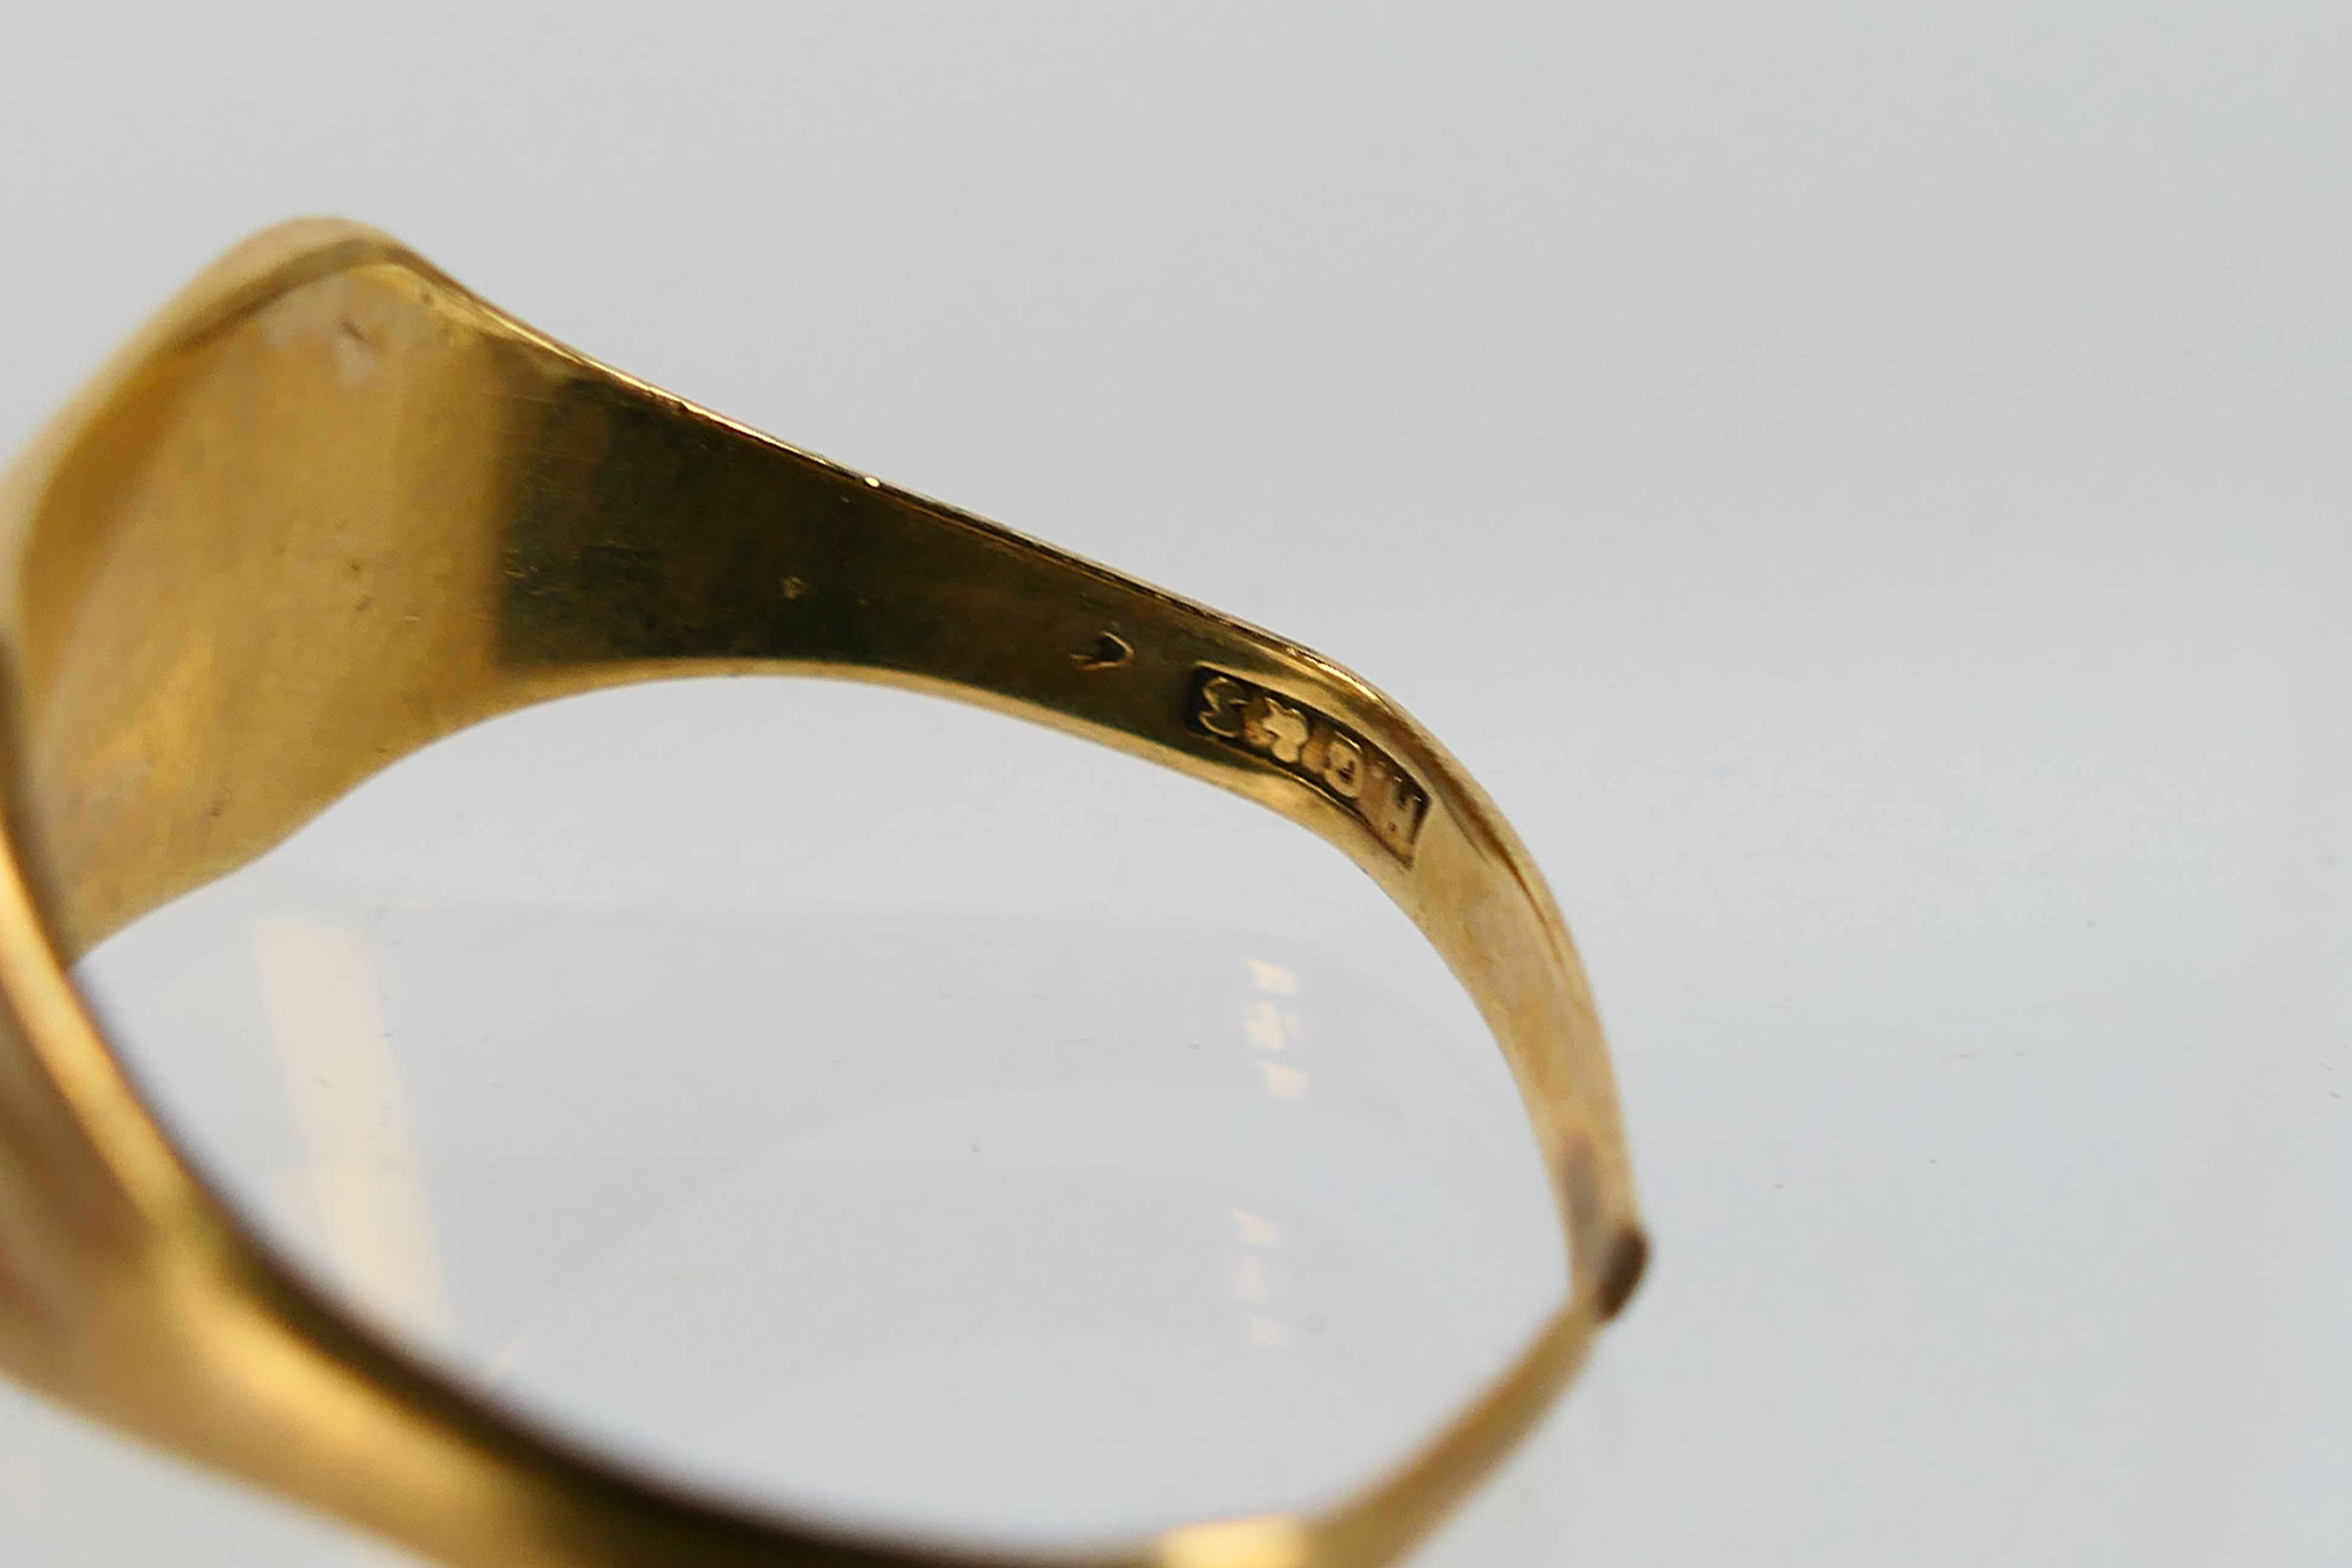 Scrap Gold - A 9ct yellow gold ring (shank cut), 2.4 grams. - Image 4 of 4